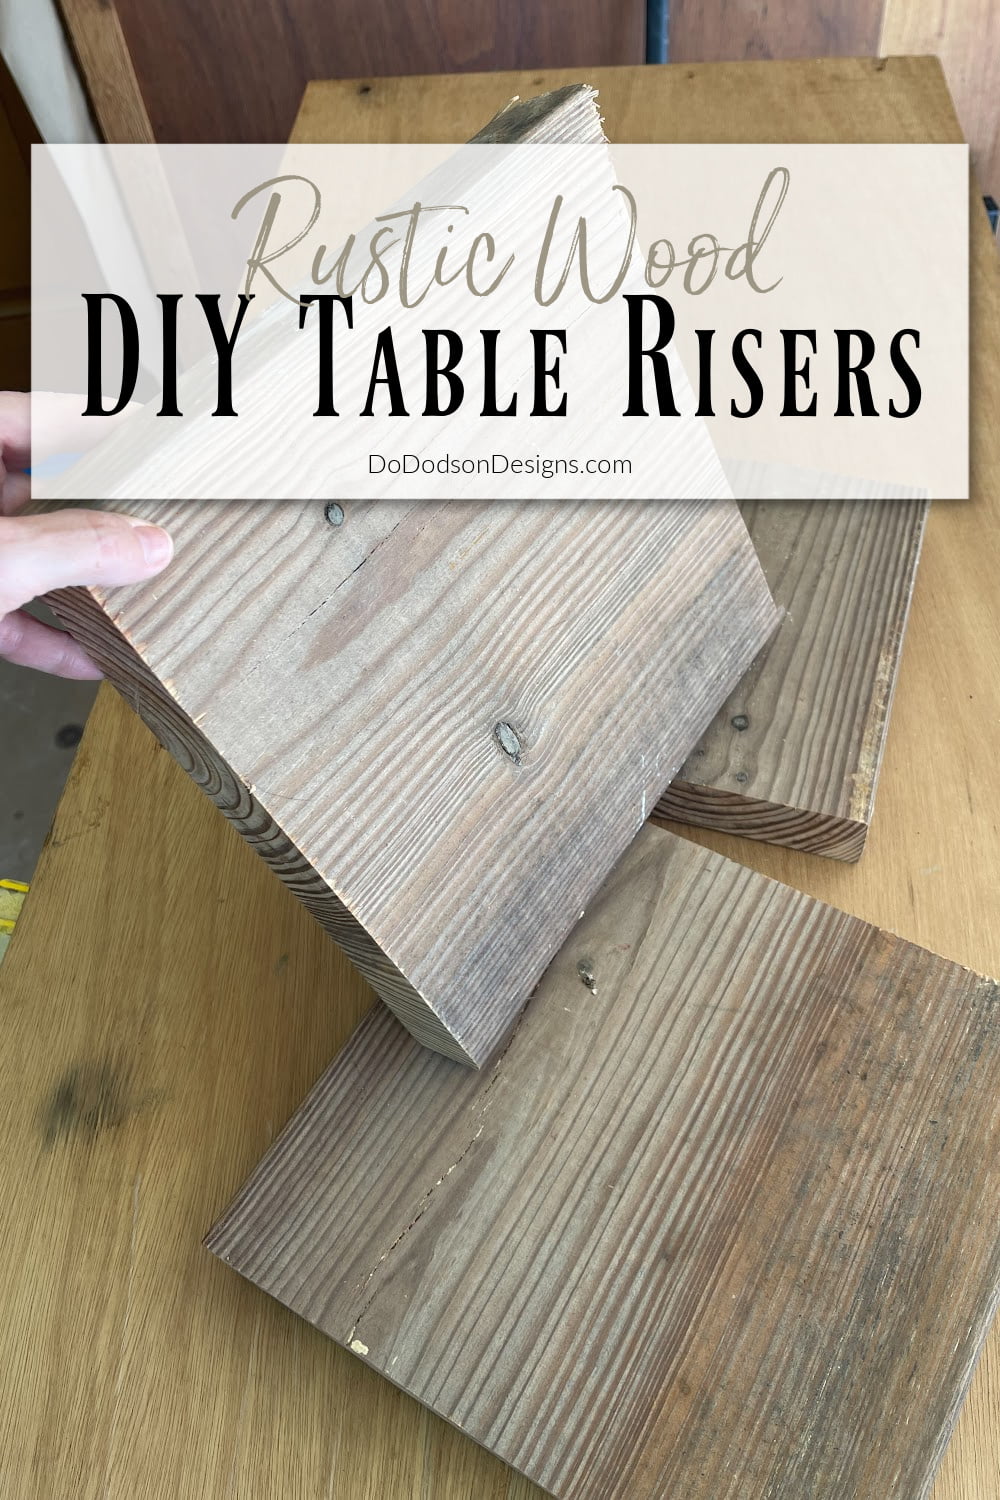 How To Make DIY Table Risers - Cutting Boards